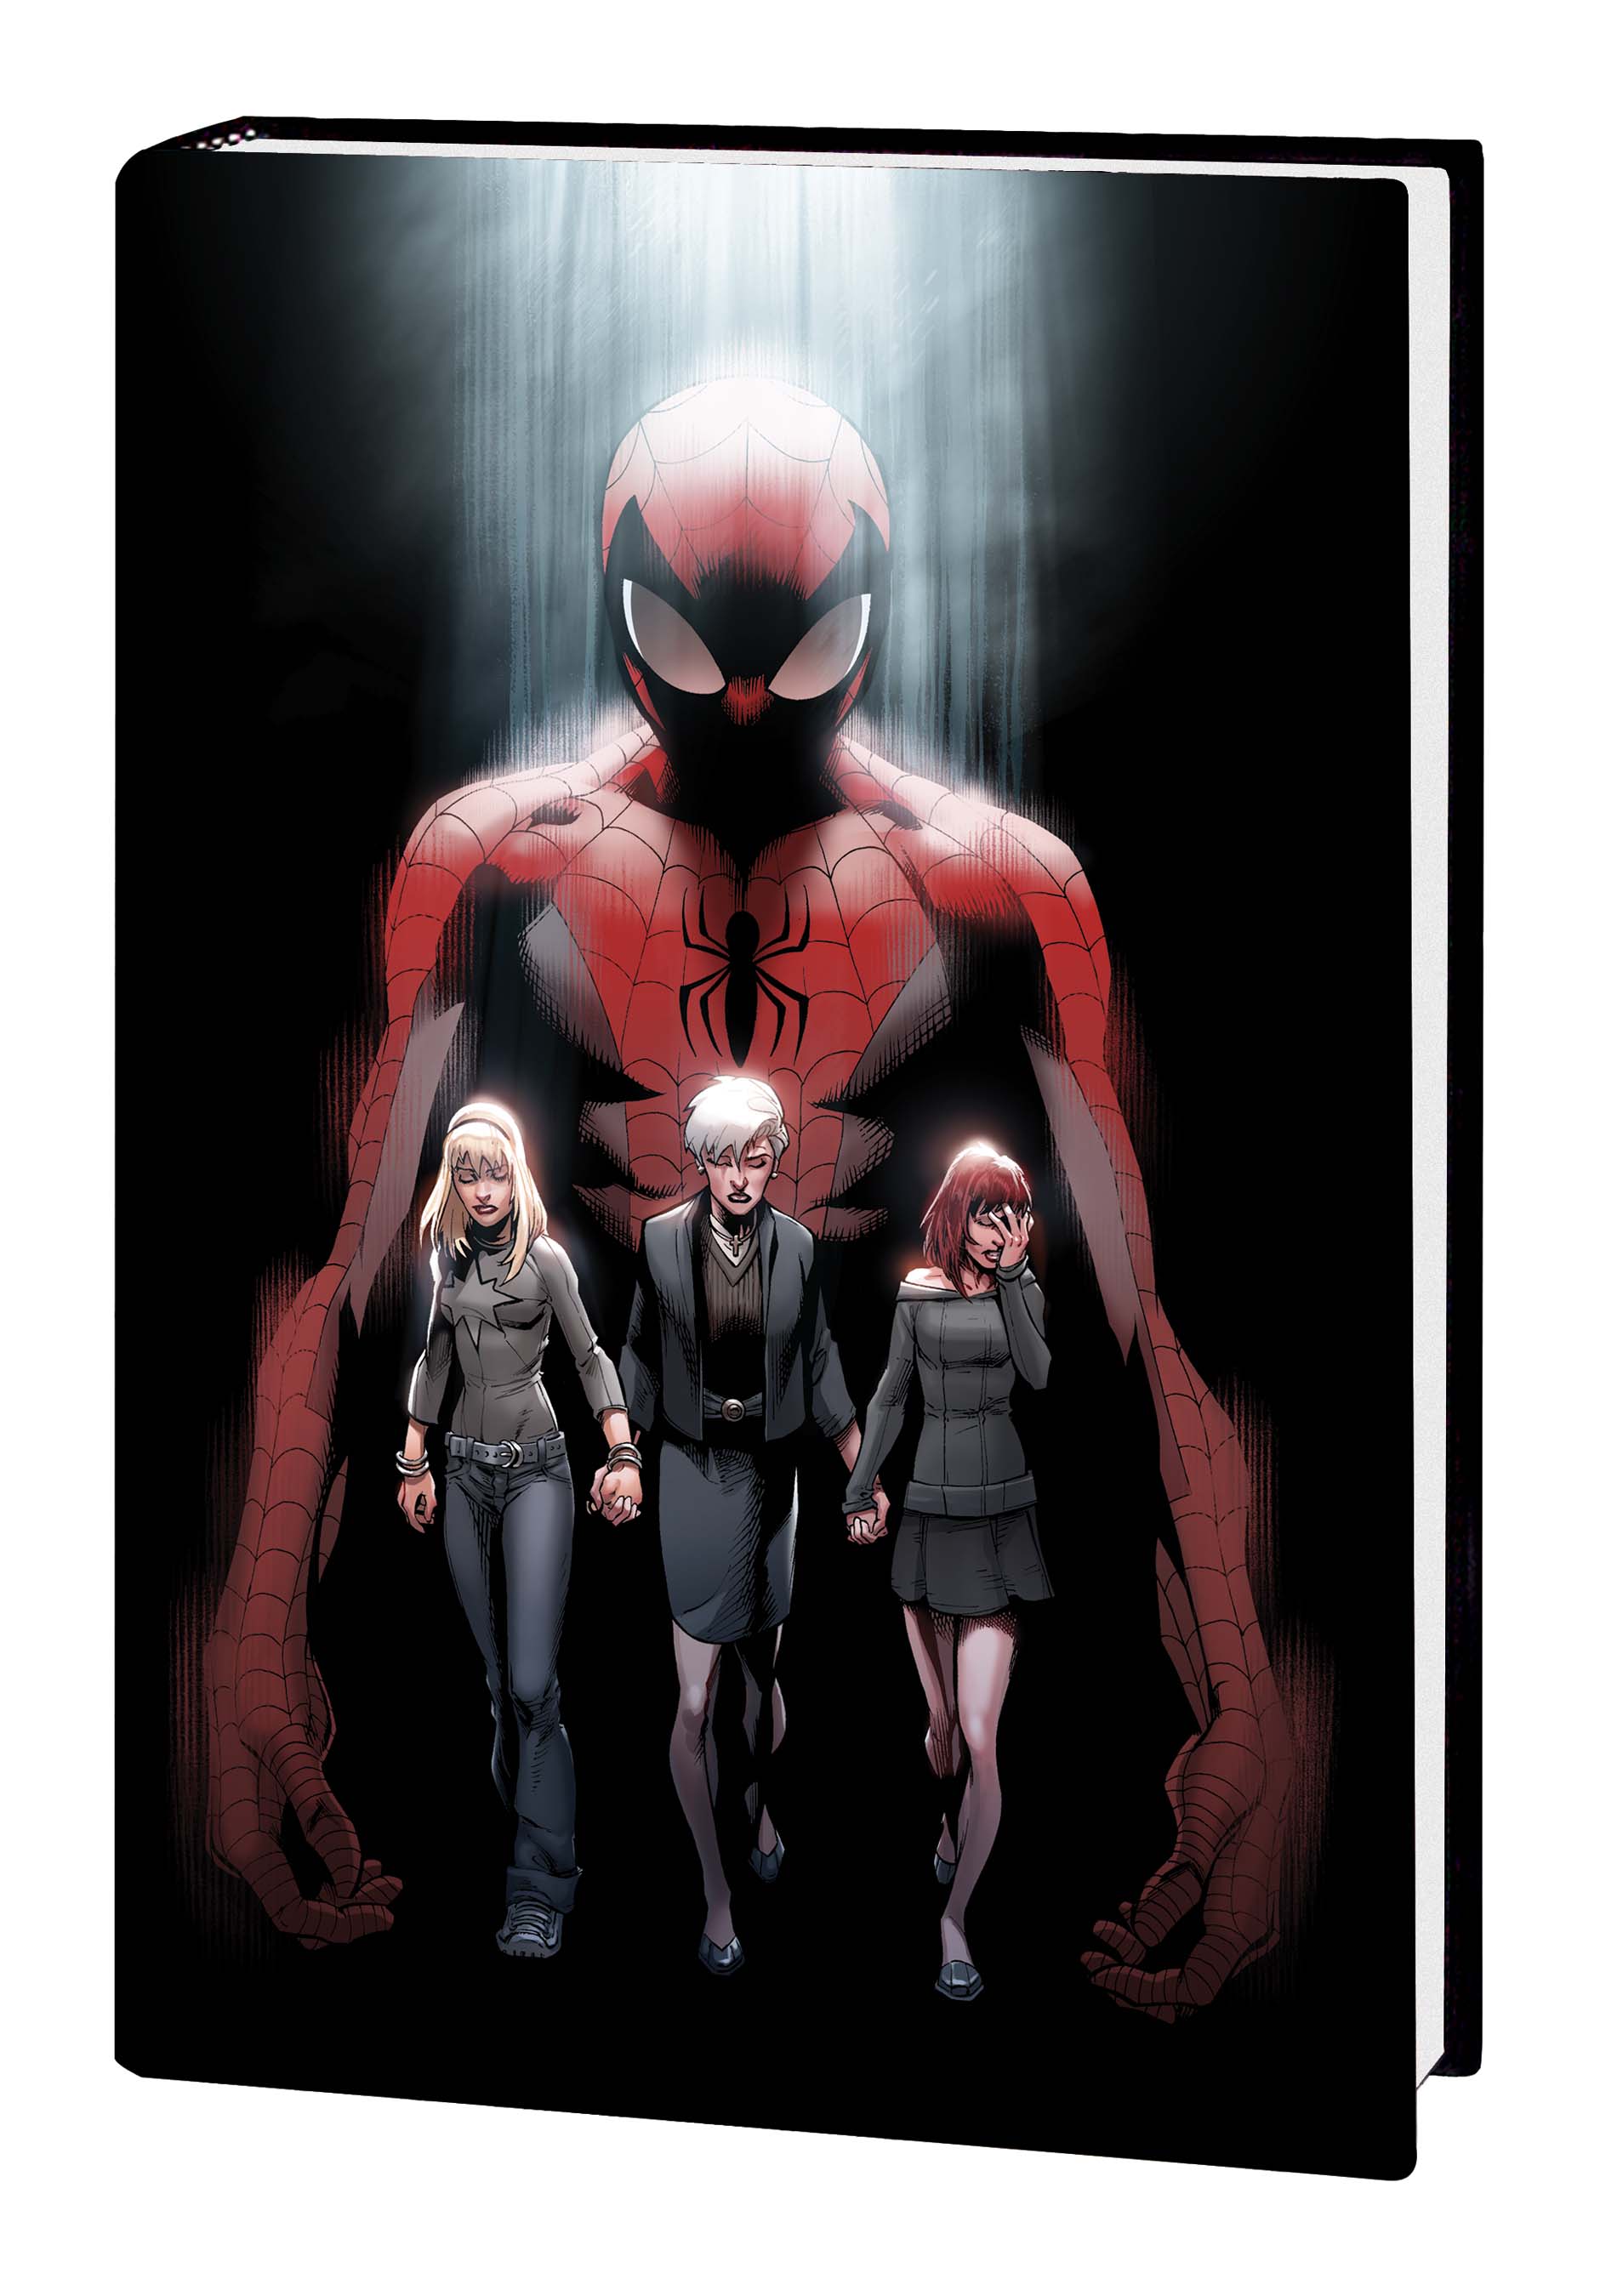 ULTIMATE COMICS SPIDER-MAN: DEATH OF SPIDER-MAN FALLOUT TPB (Trade Paperback)